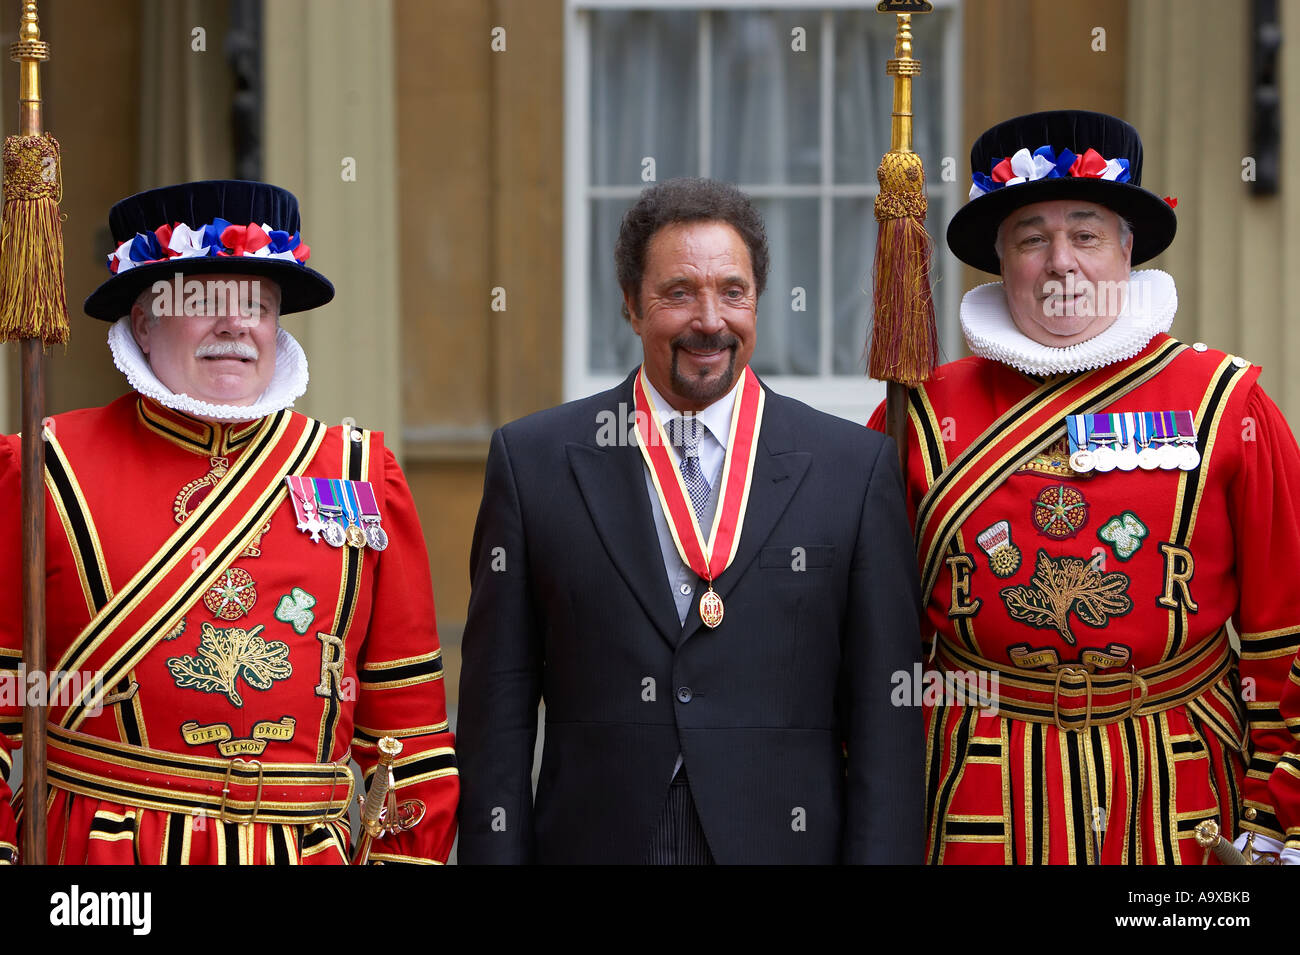 sir tom jones at buckingham palace stands next to 2 beefeaters from th tower of london Stock Photo